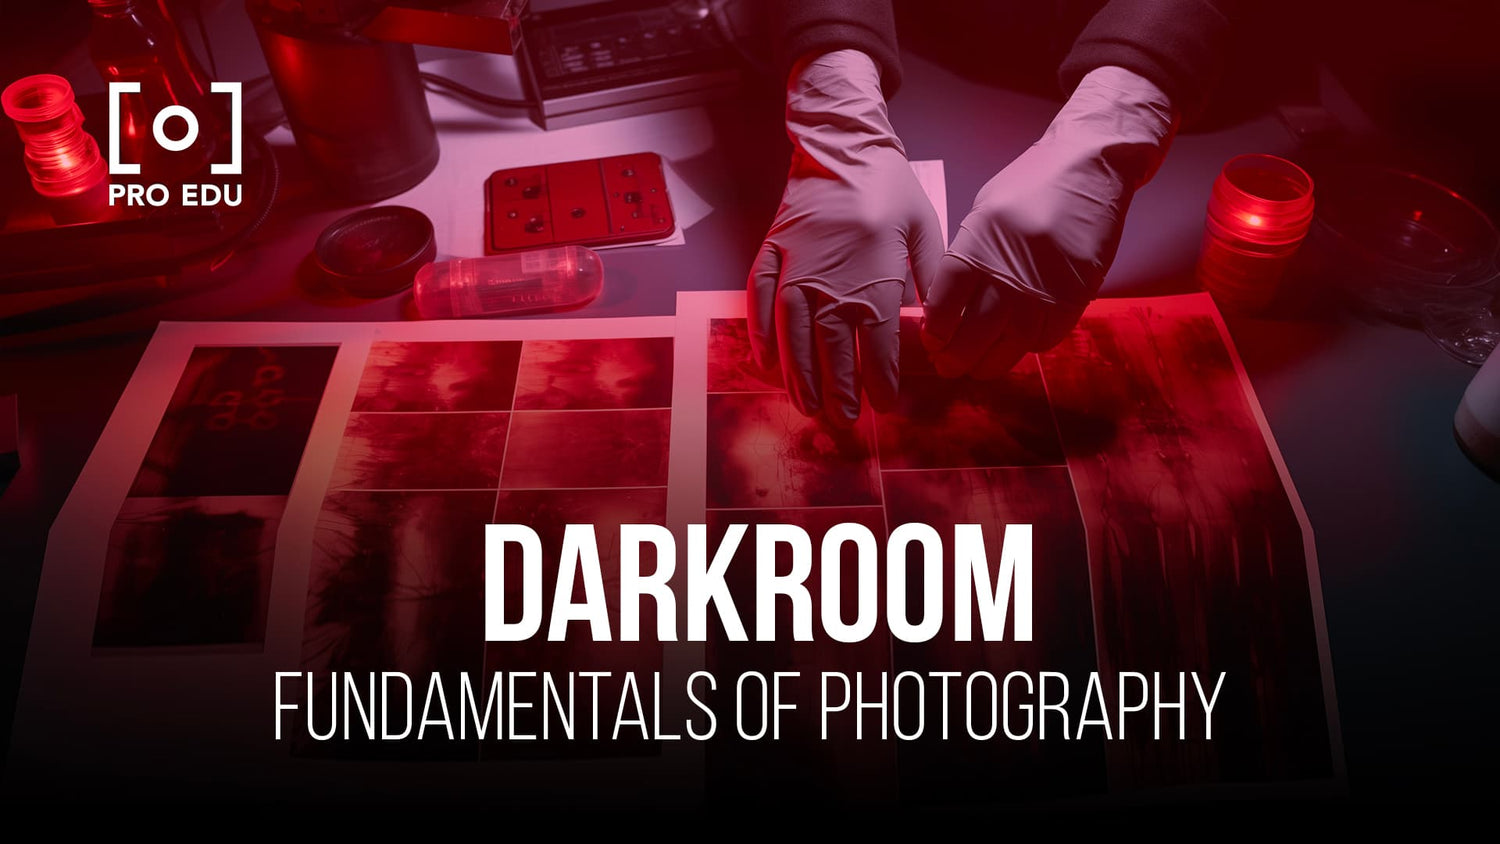 Exploring the art of traditional photography with darkroom techniques